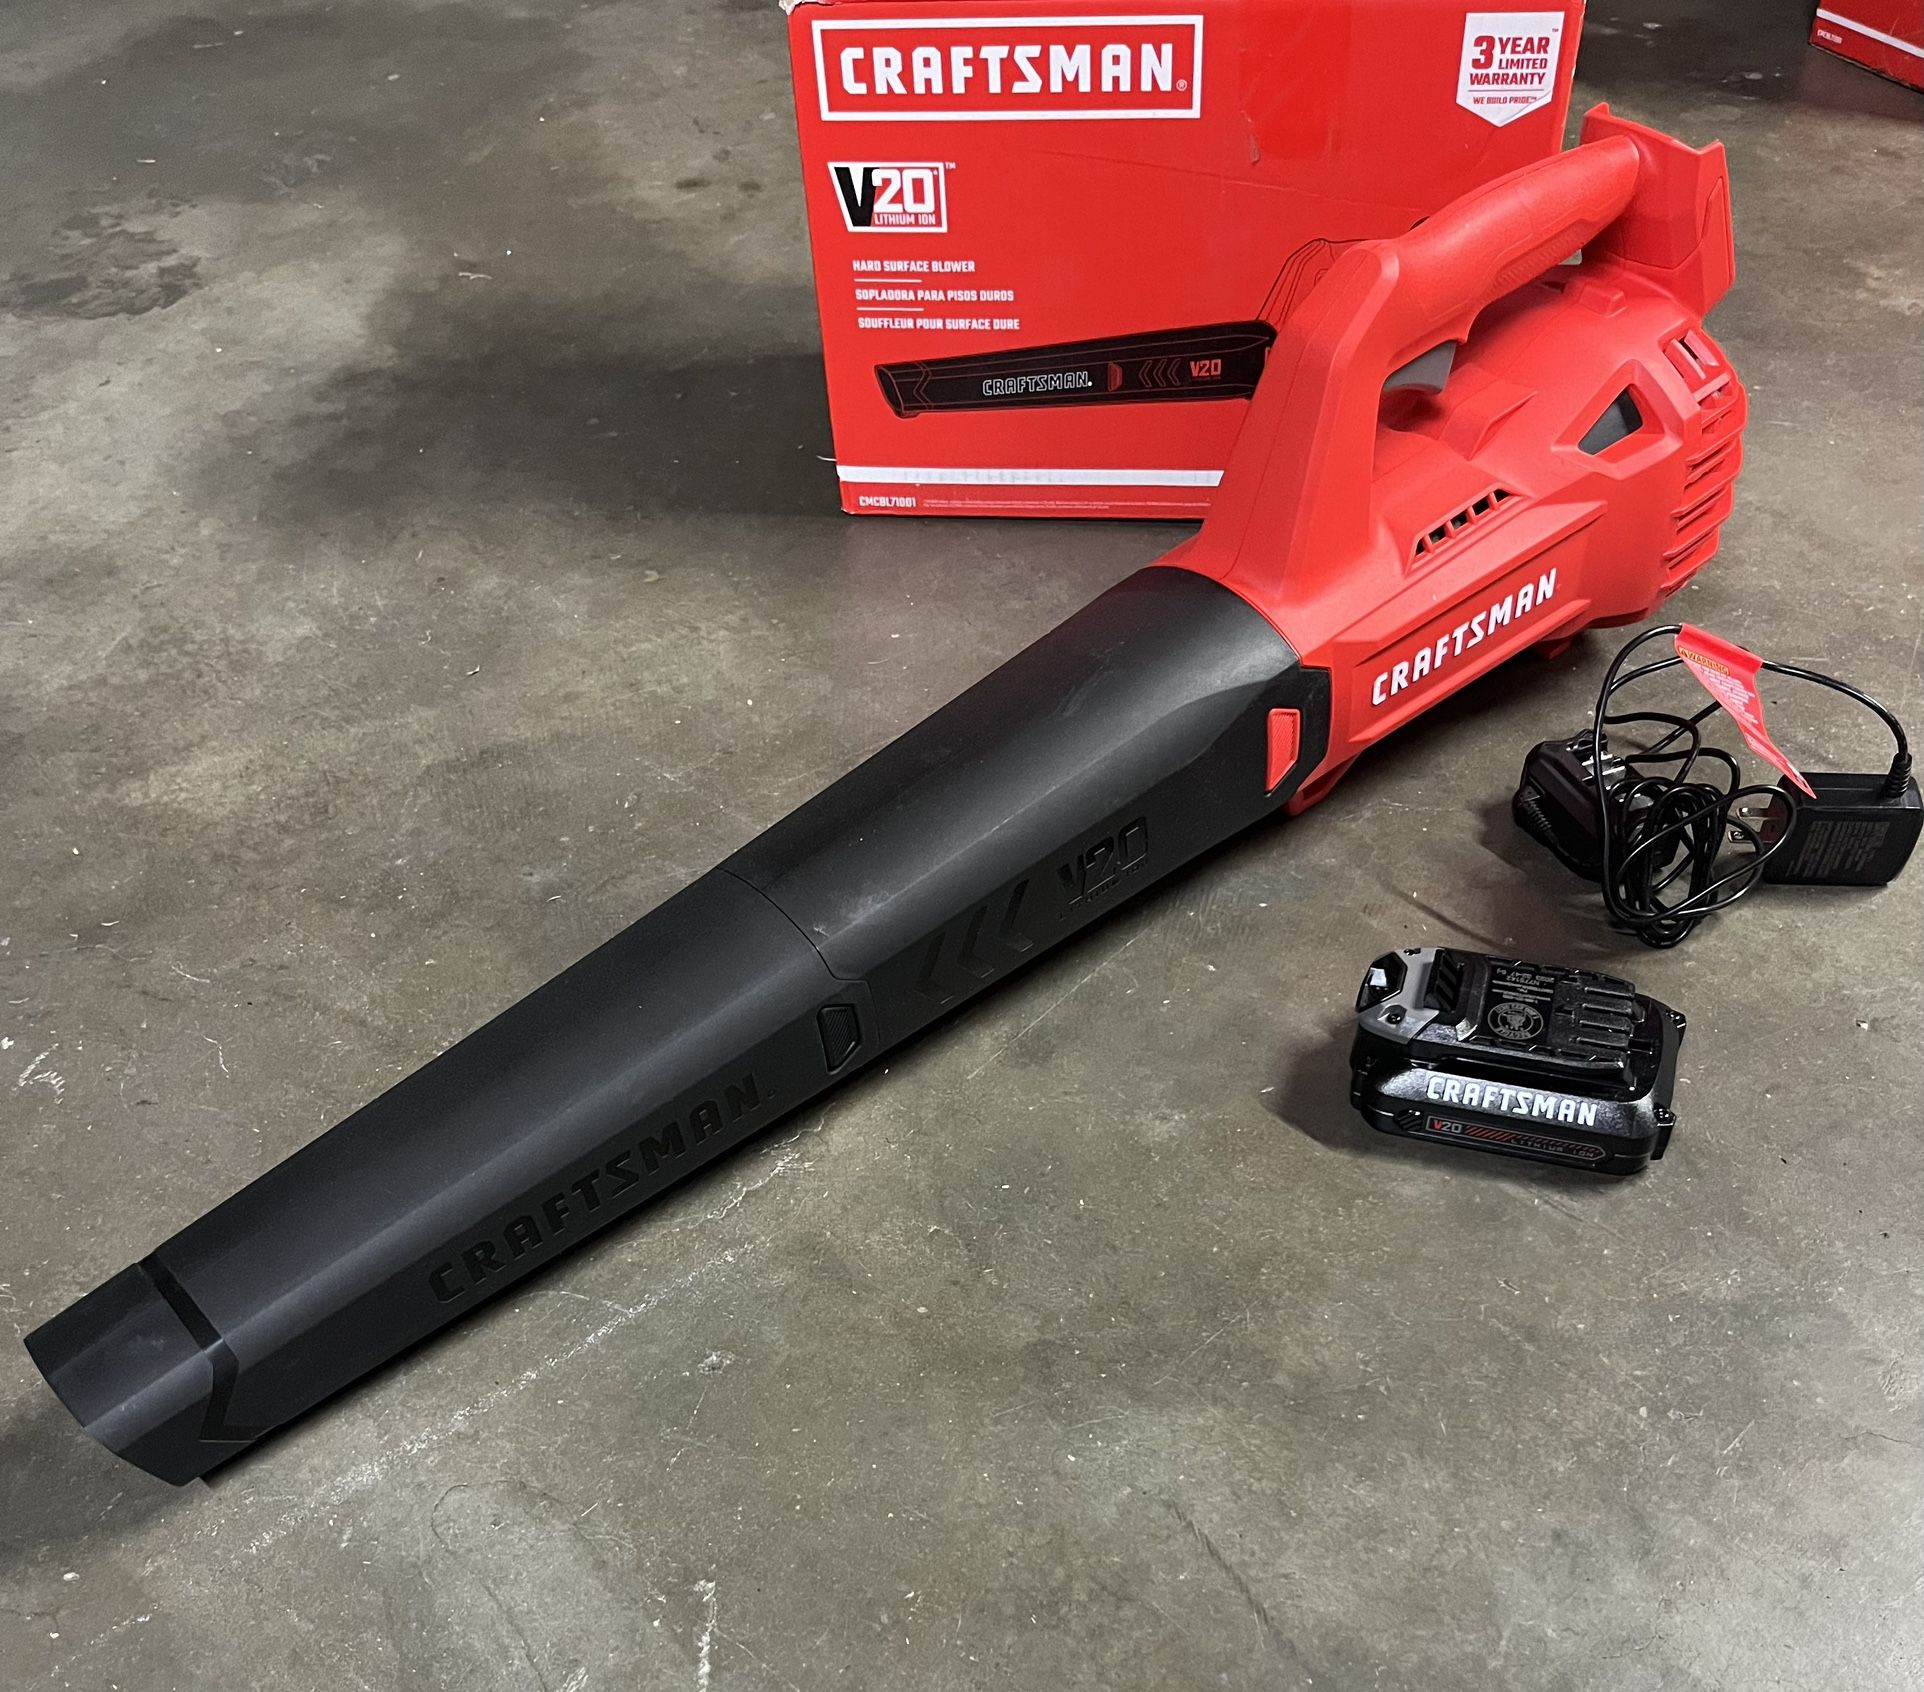 New! CRAFTSMAN 20V MAX Cordless Leaf Blower Kit with Battery & Charger Included (CMCBL710) Red